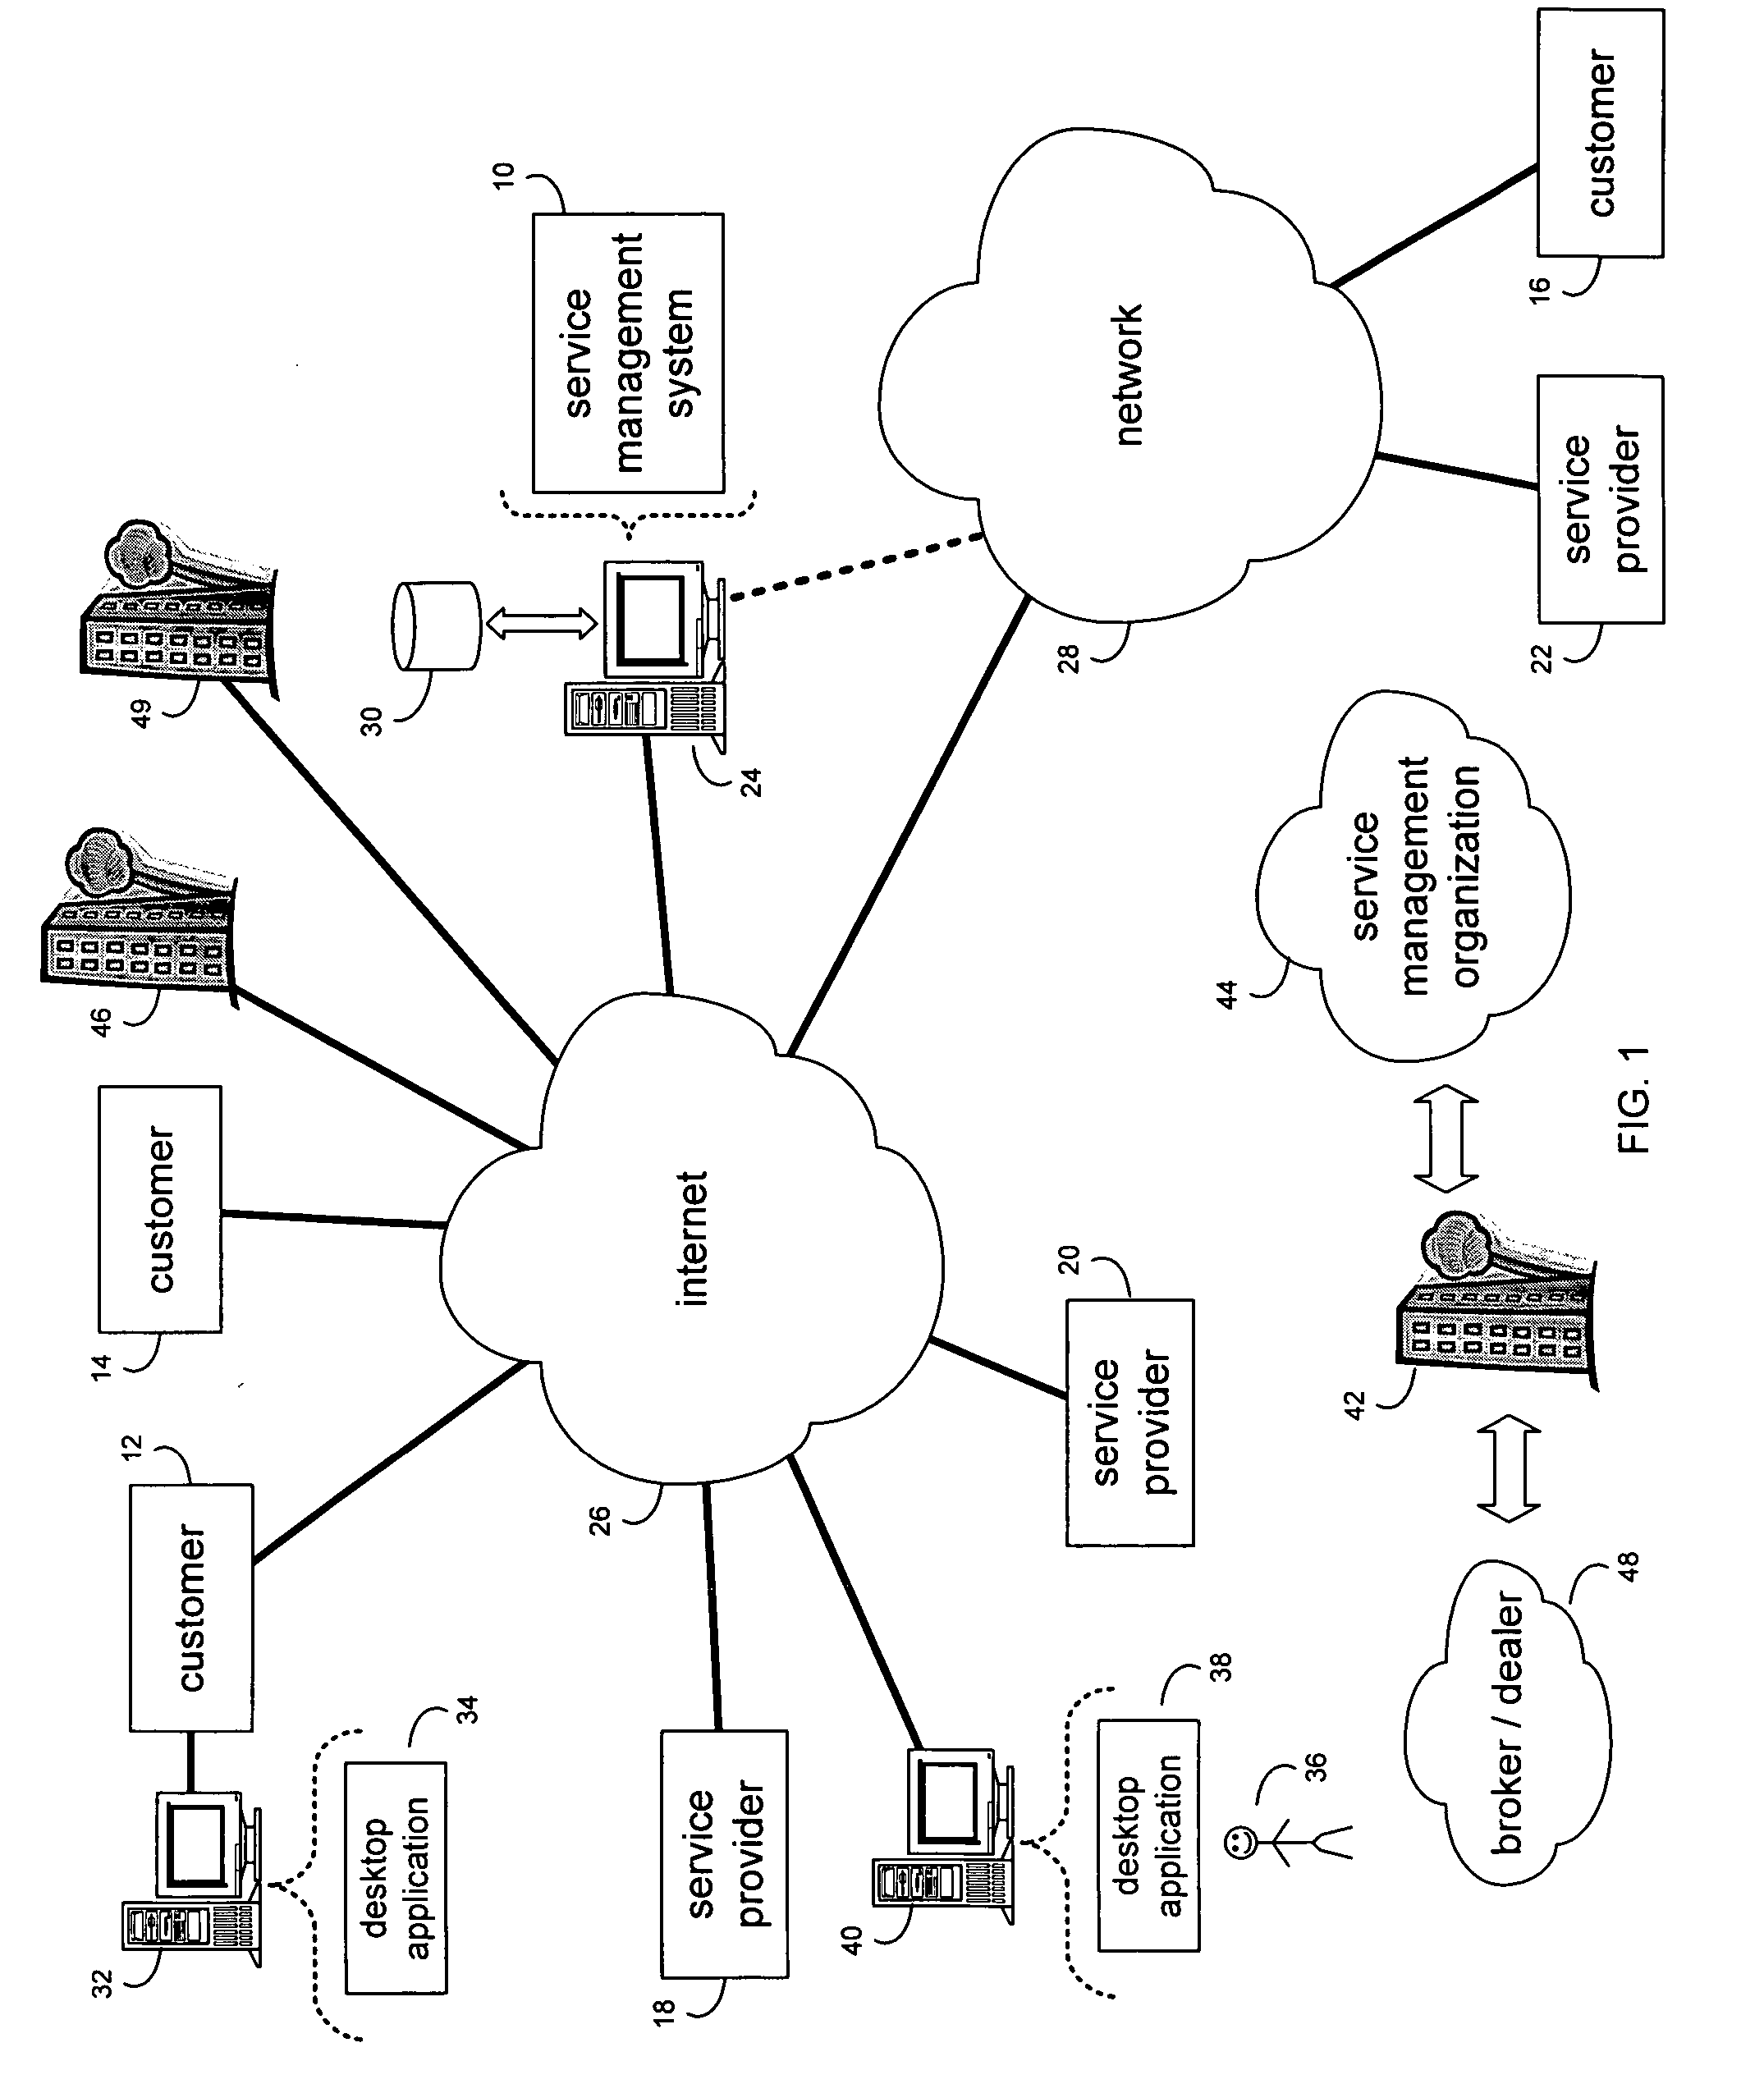 Method and system for ranking research providers